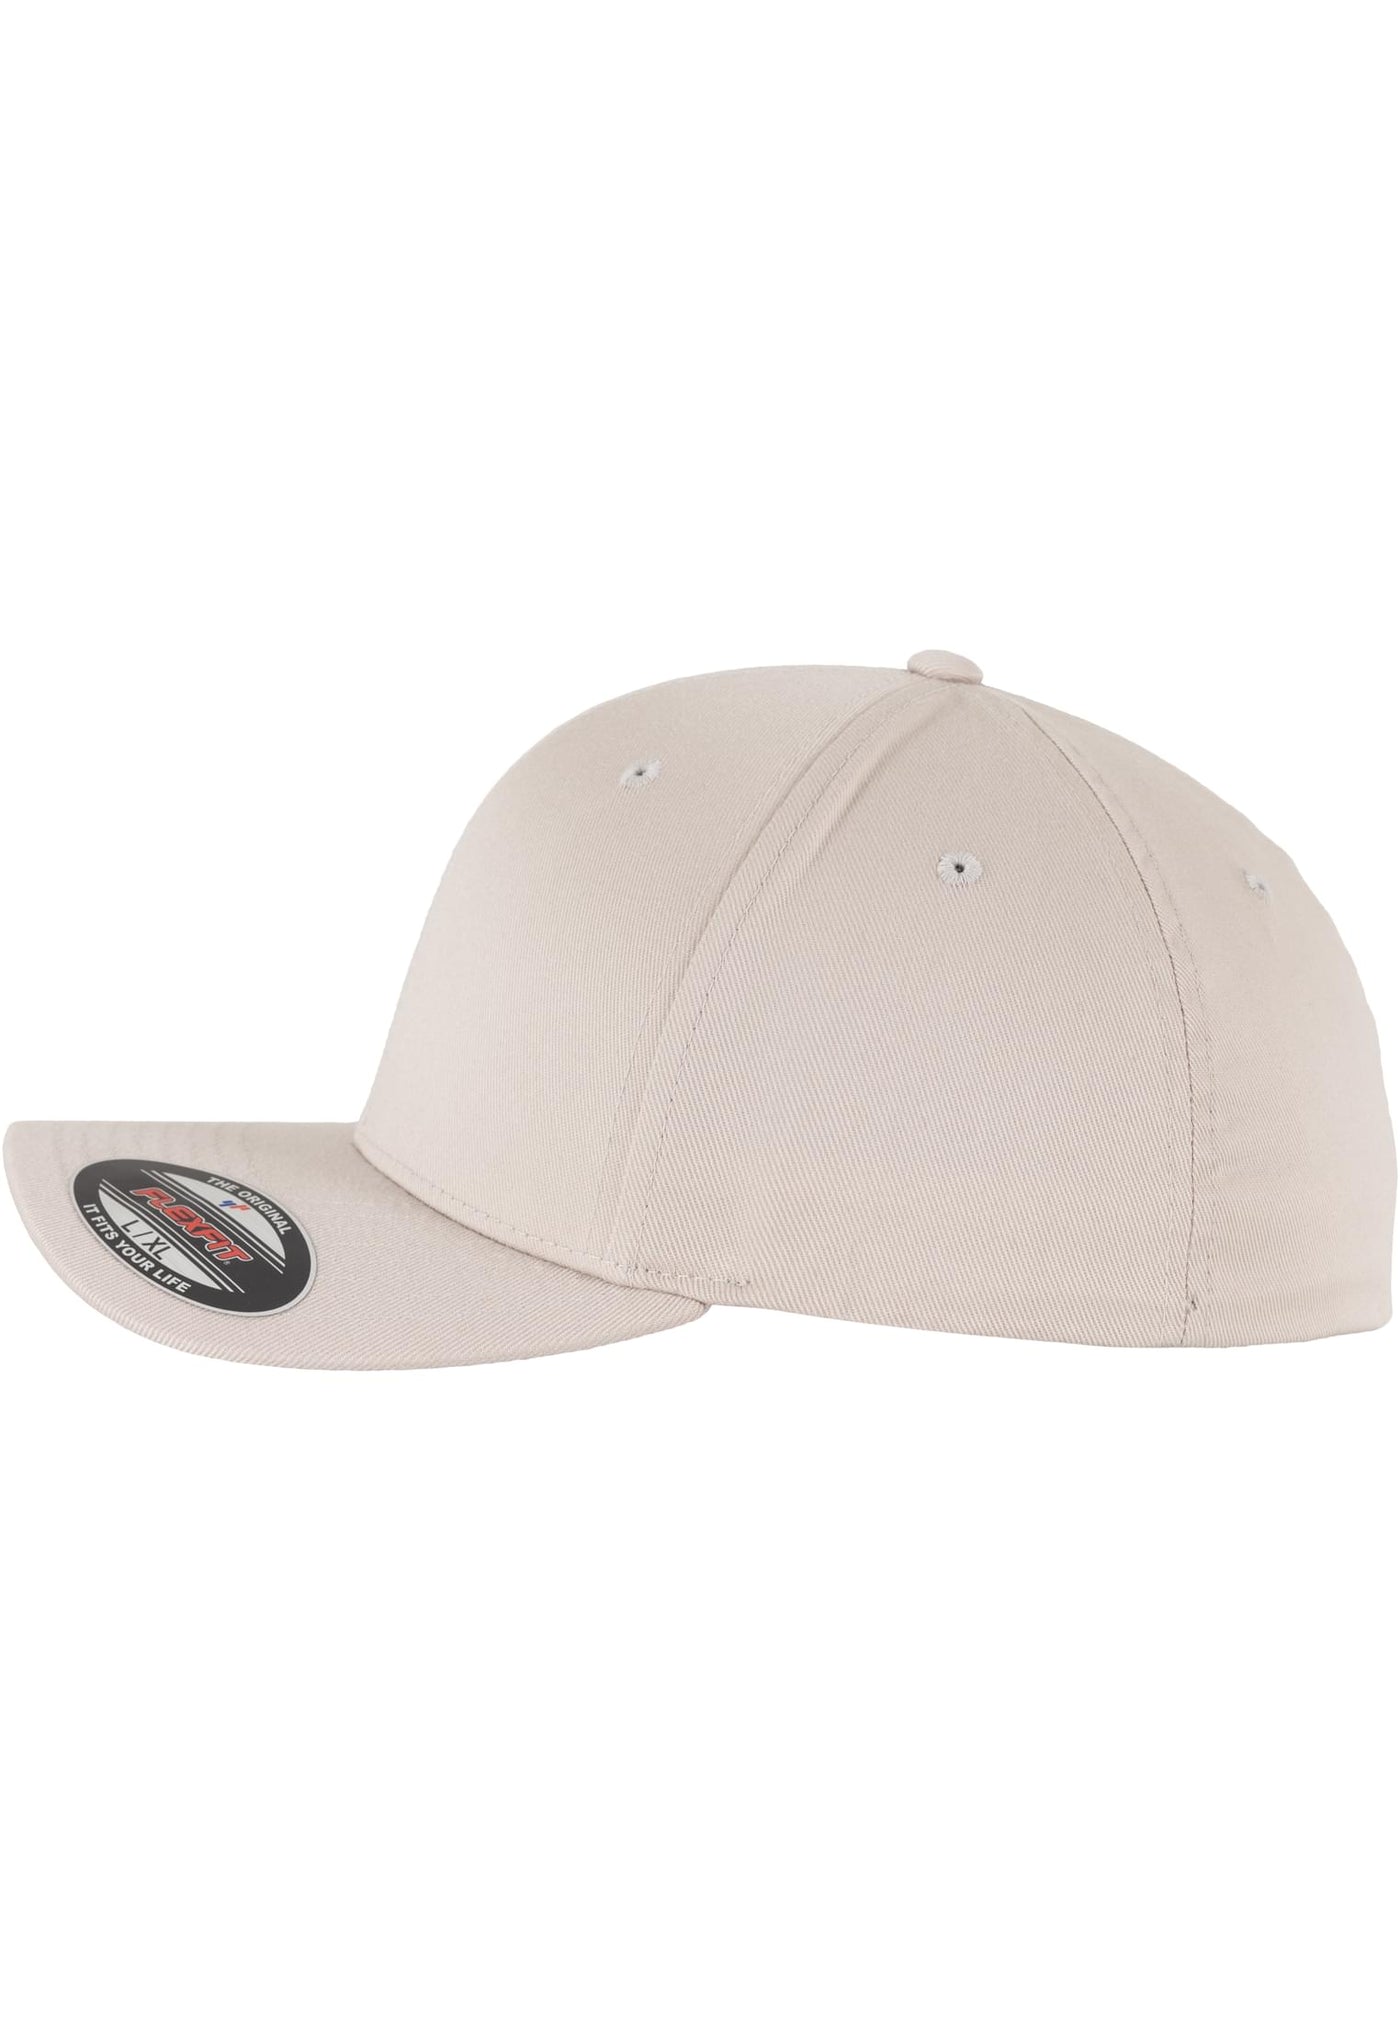 Flexfit Wooly Combed 6277 Cap - Stone